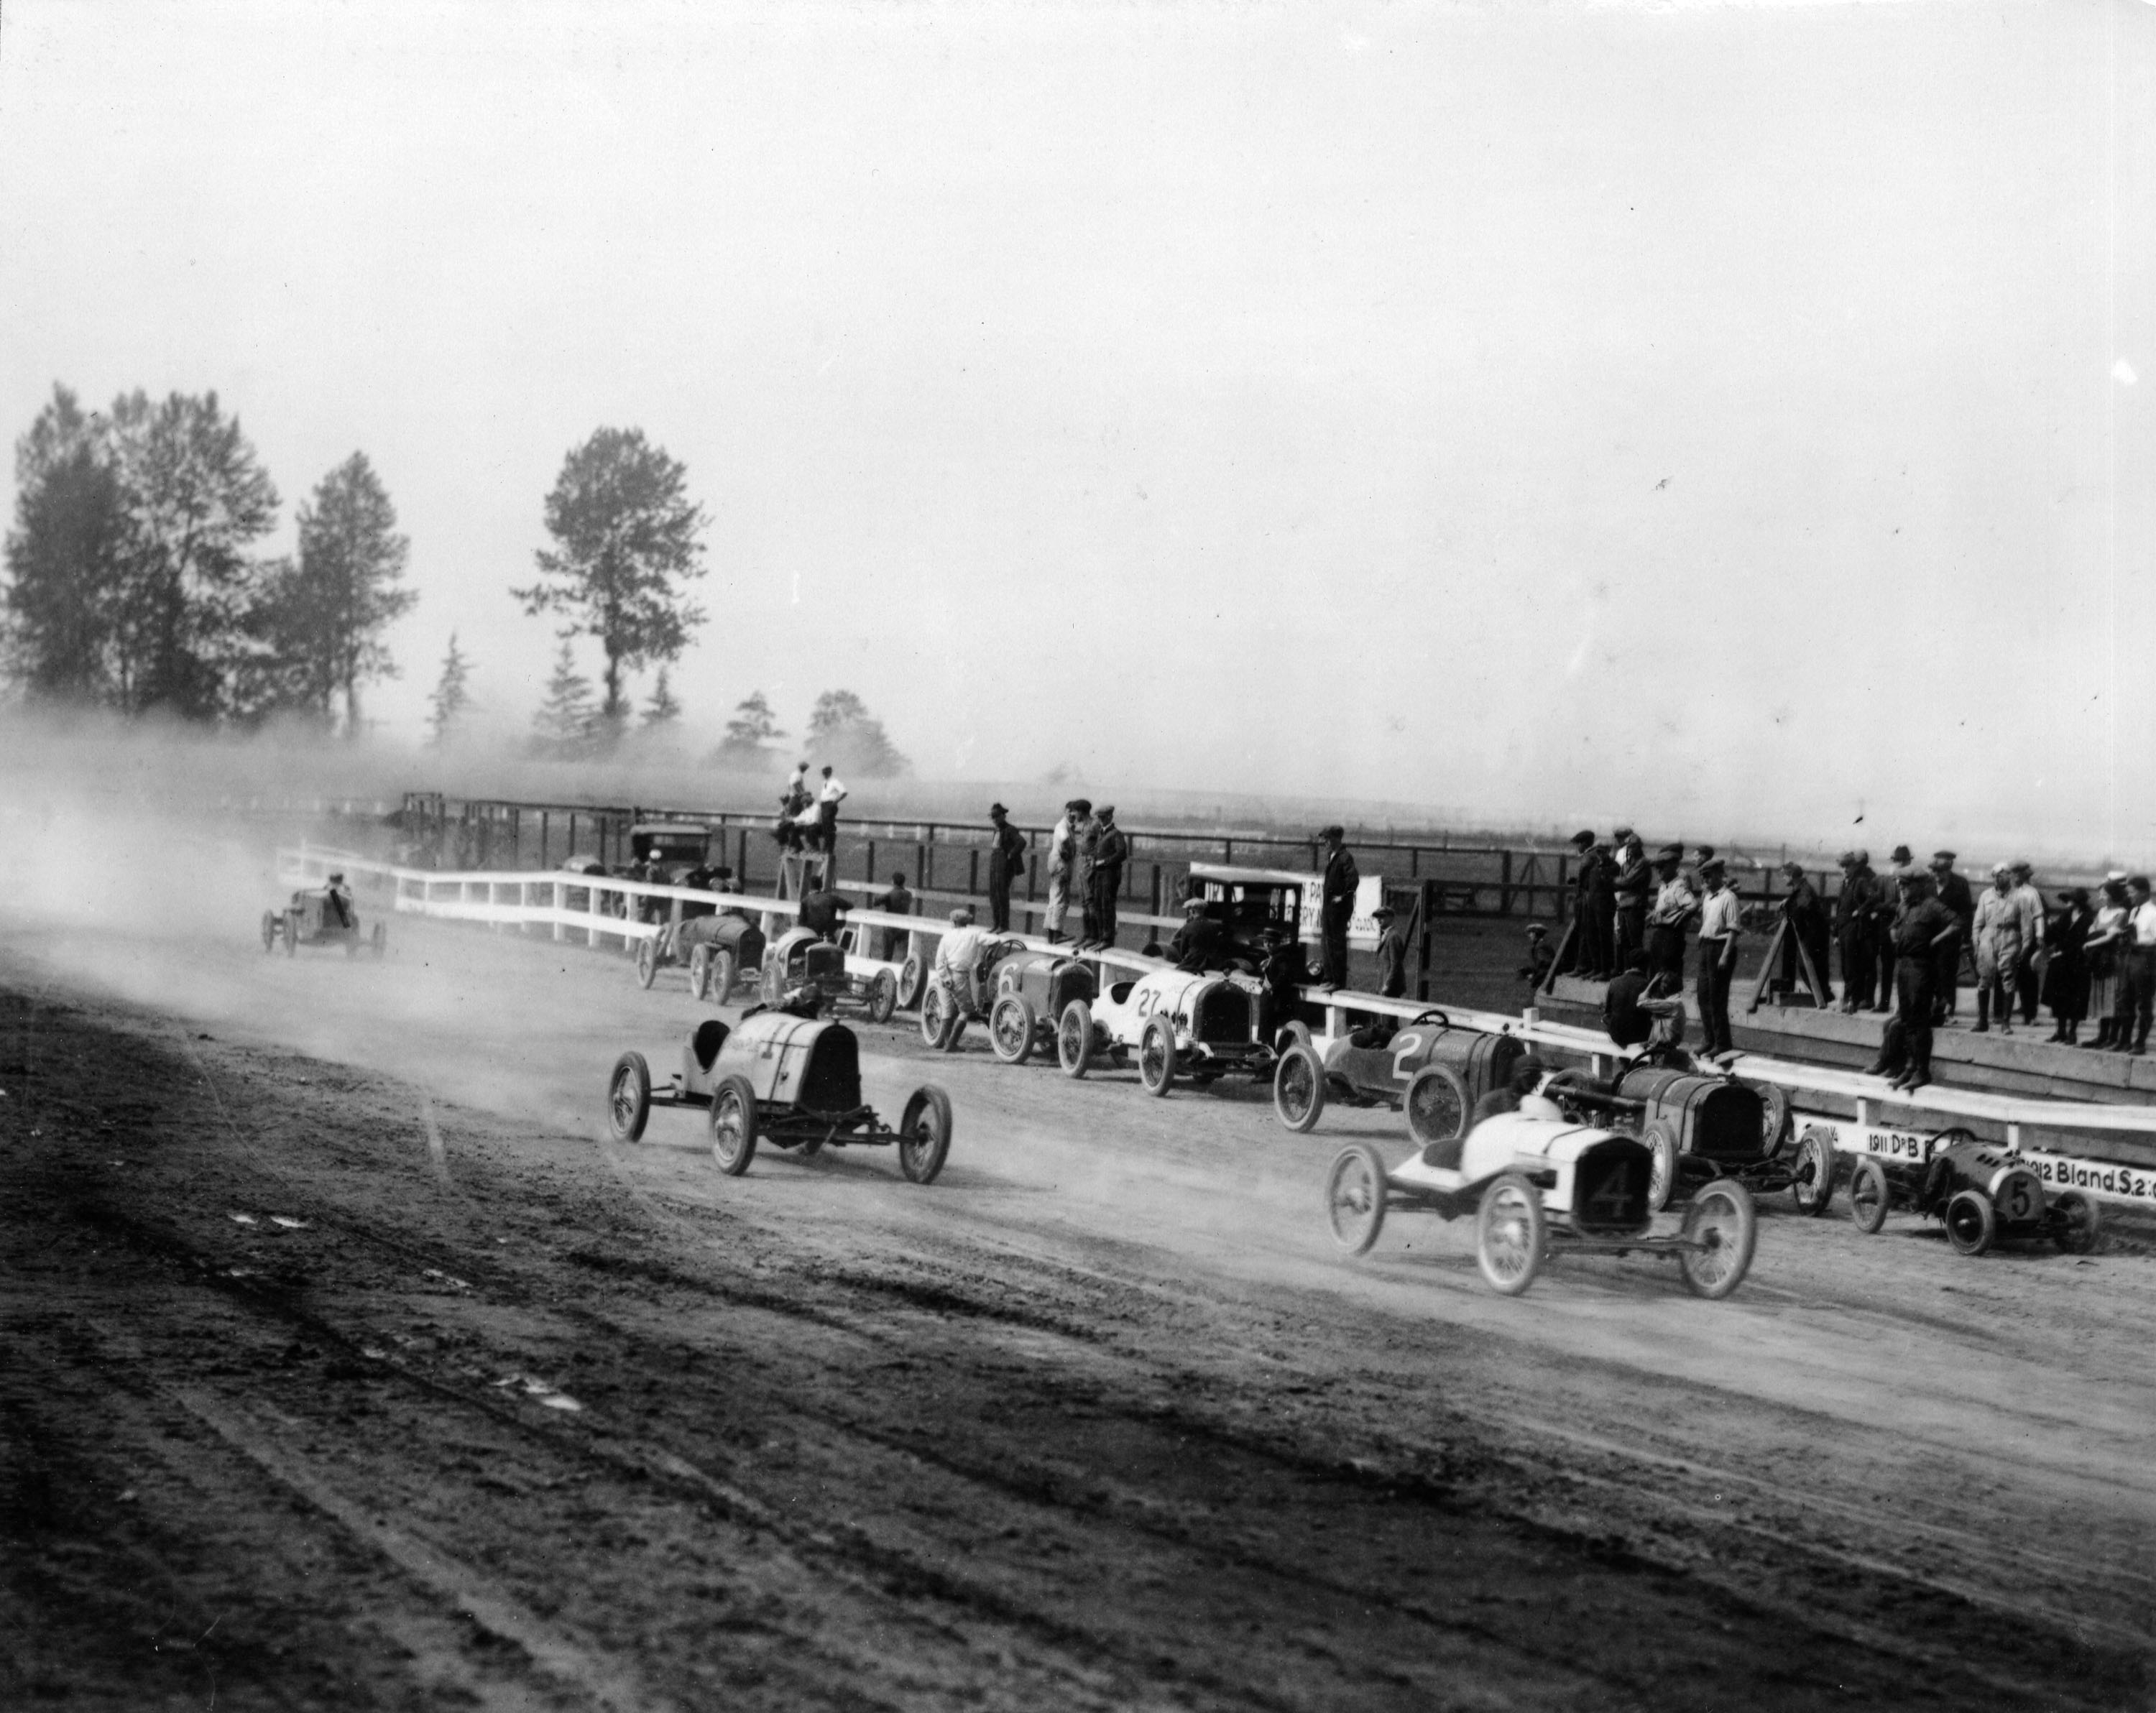 cars on track, with spectators nearby